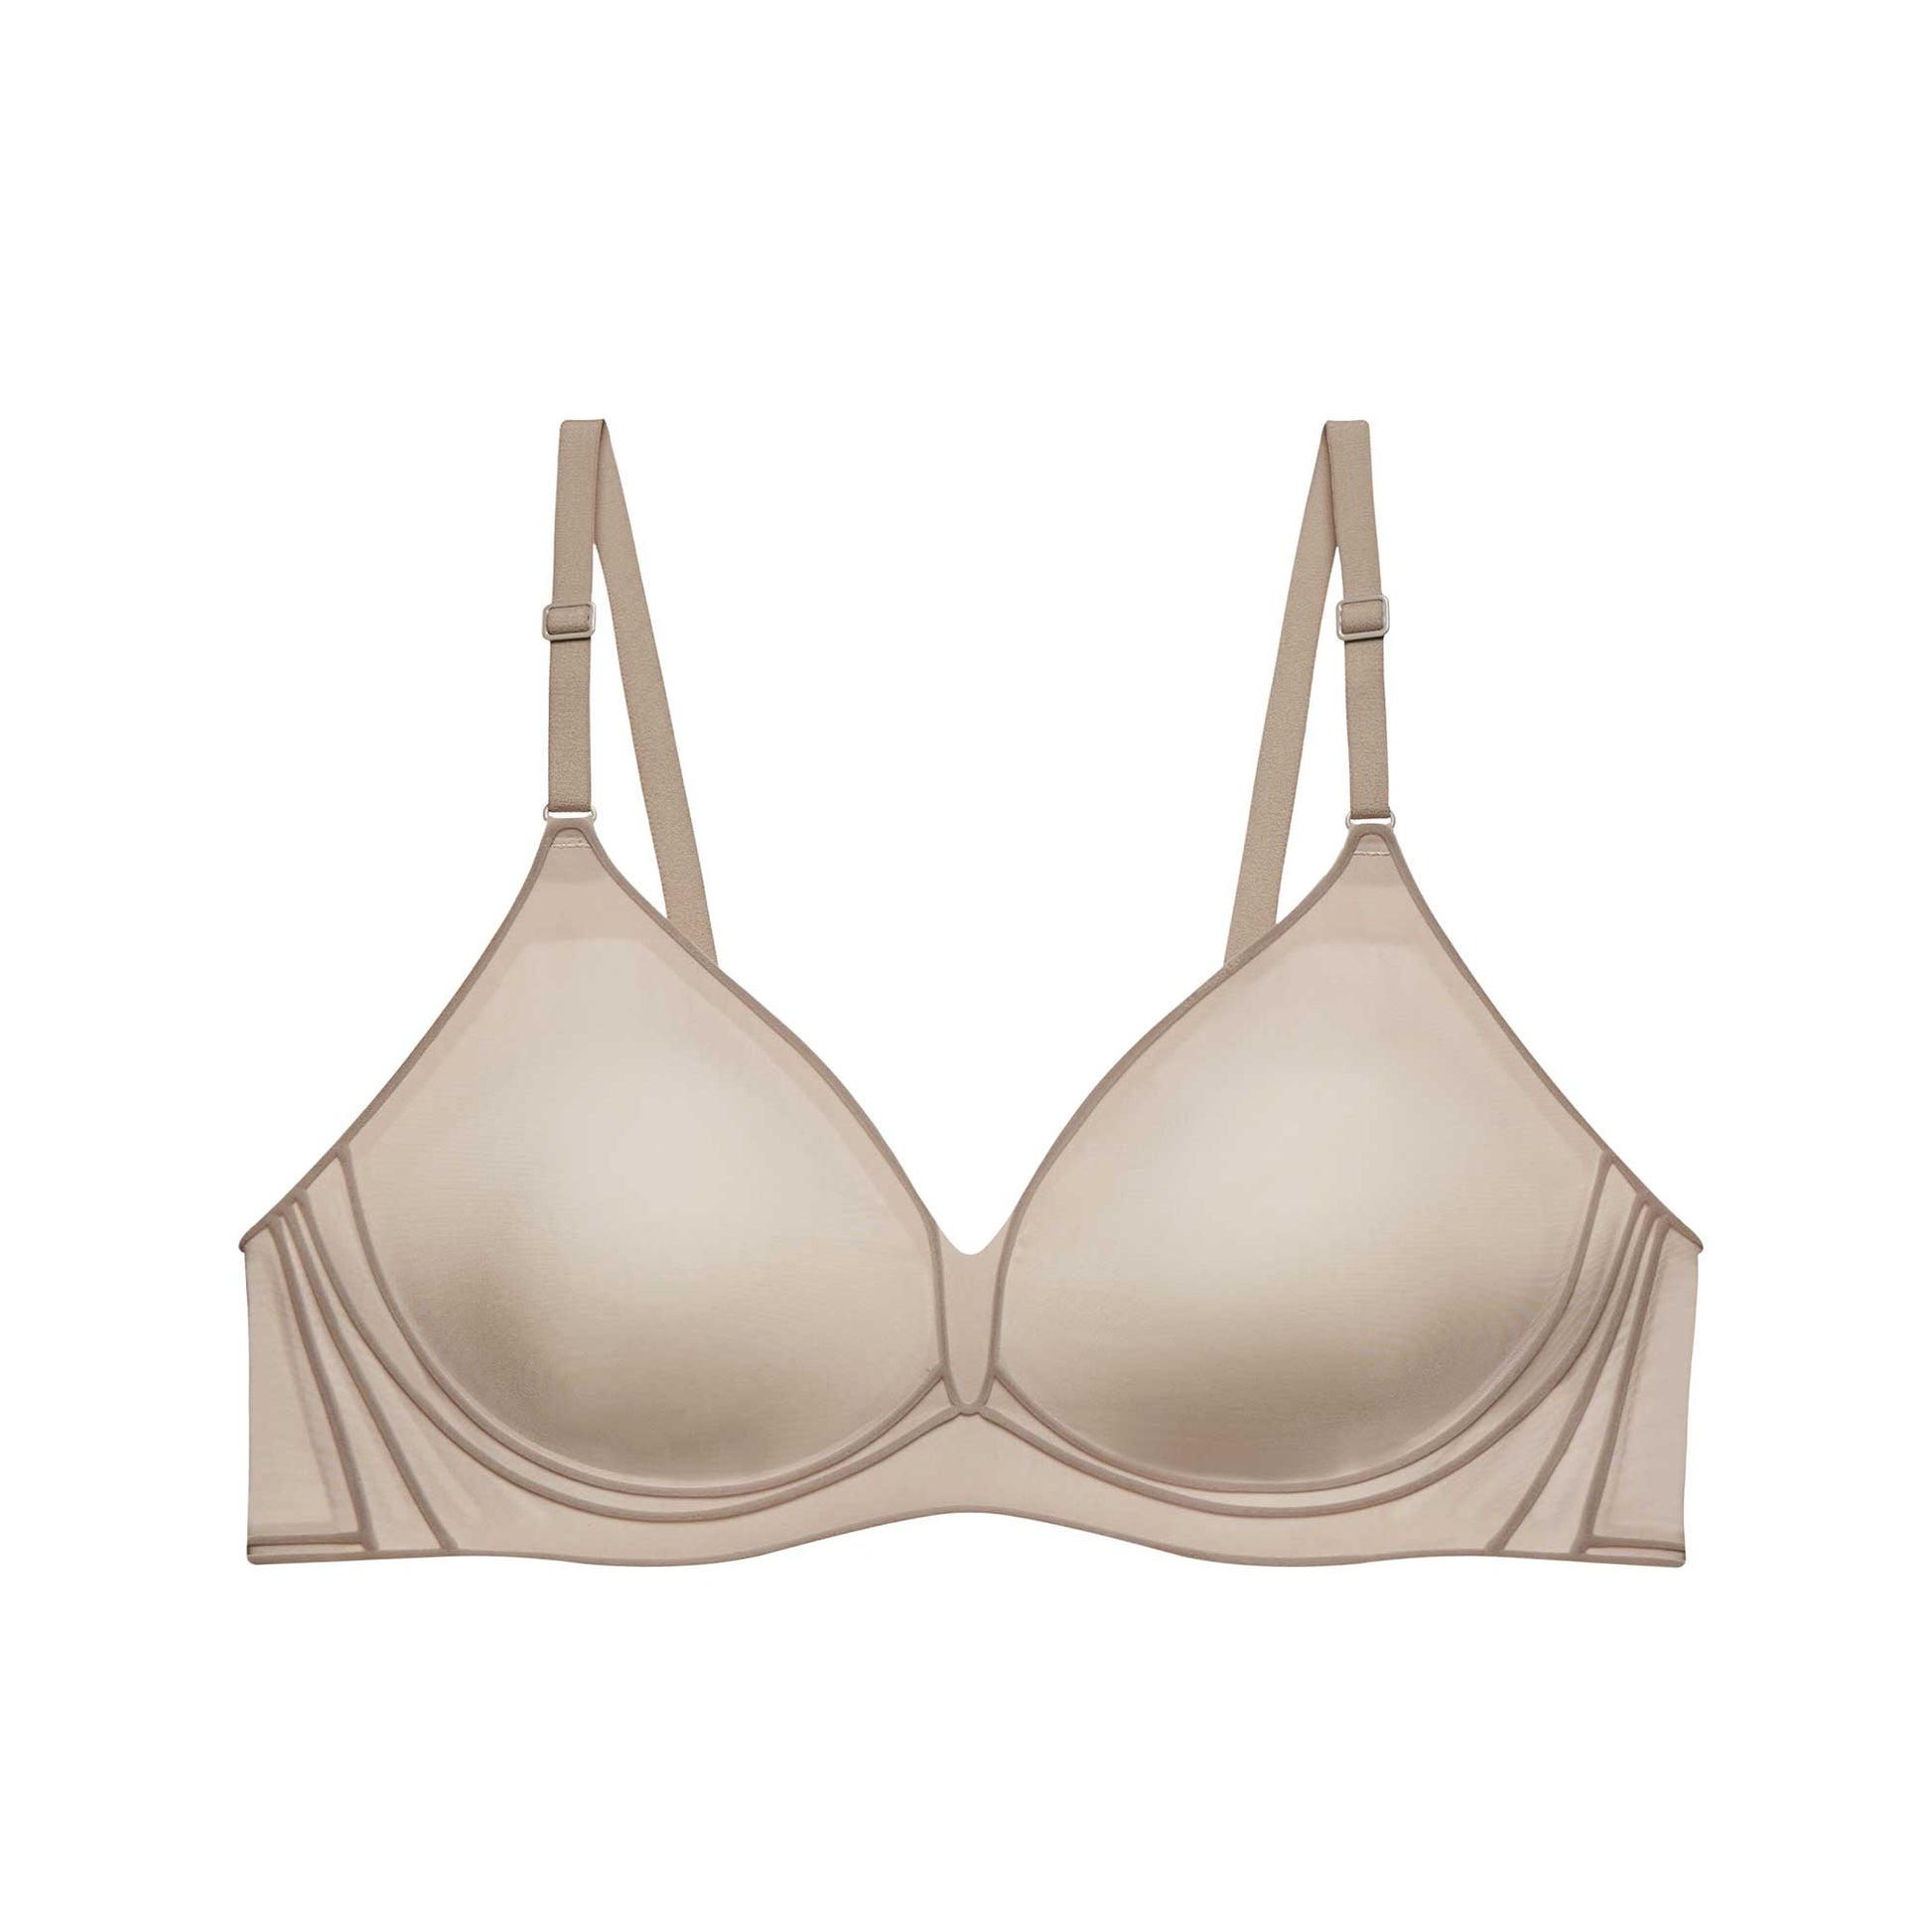 DOMINIQUE Adult Female Aimee Everyday Contour Bra, Color: Nude, Size: 32,  Cup: B